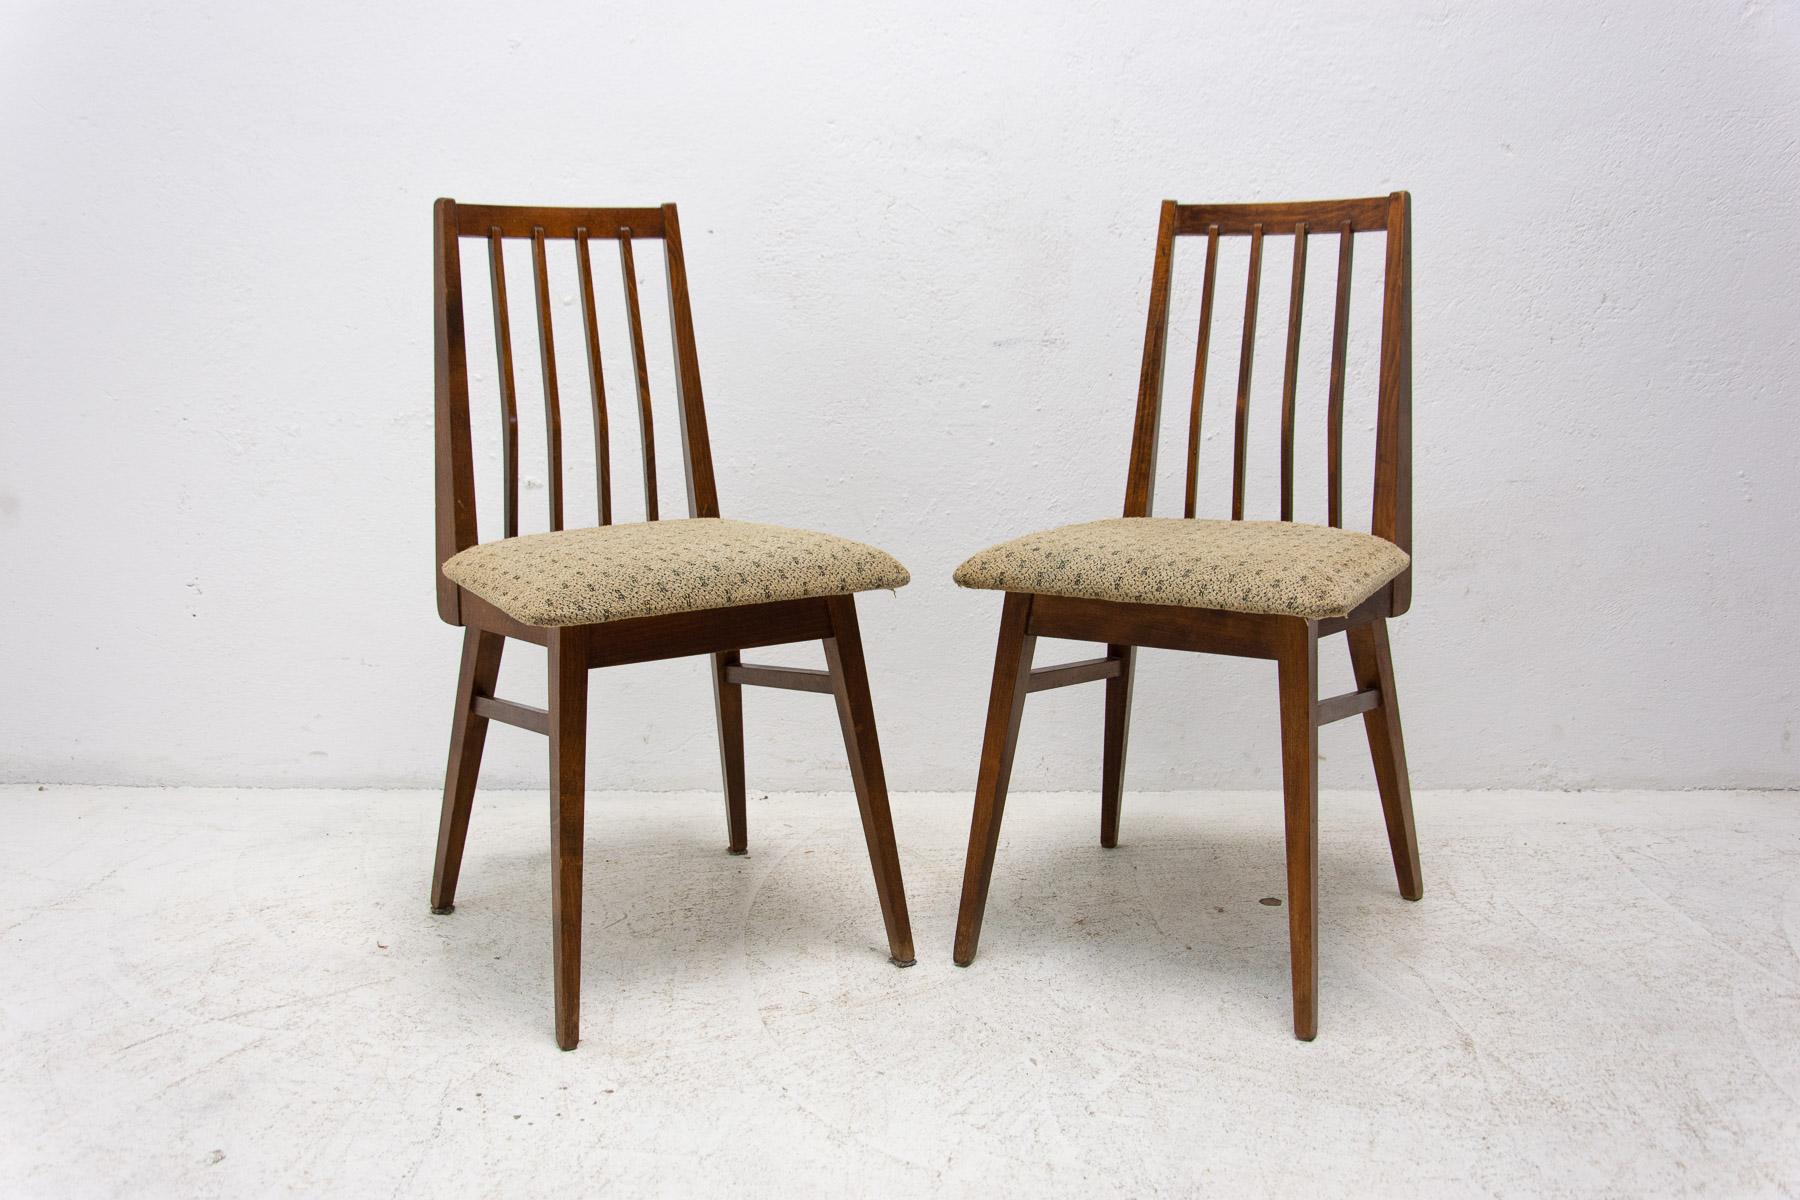 Pair of upholstered dining chairs, made in the former Czechoslovakia in the 1970s. The chairs are constructed of beech wood. Very interesting shaping. The upholstery and wood are in good Vintage condition, shows slight signs of age and using. Price